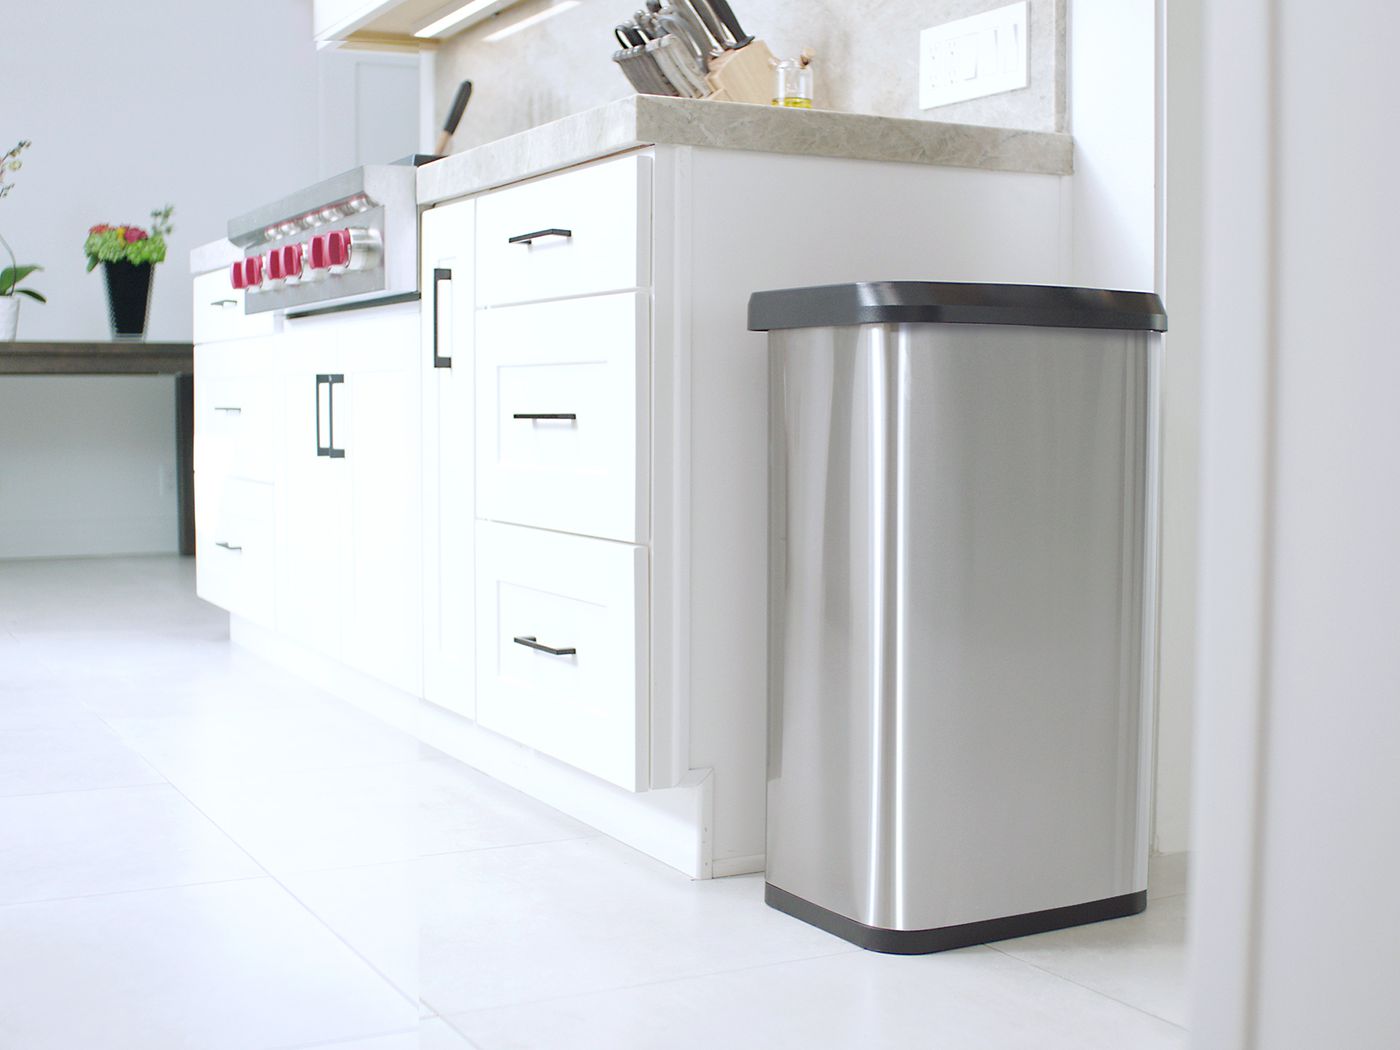 Trash-Can of Stainless Steel Touch Free Automatic Infrared Sensor Home & Kitchen 